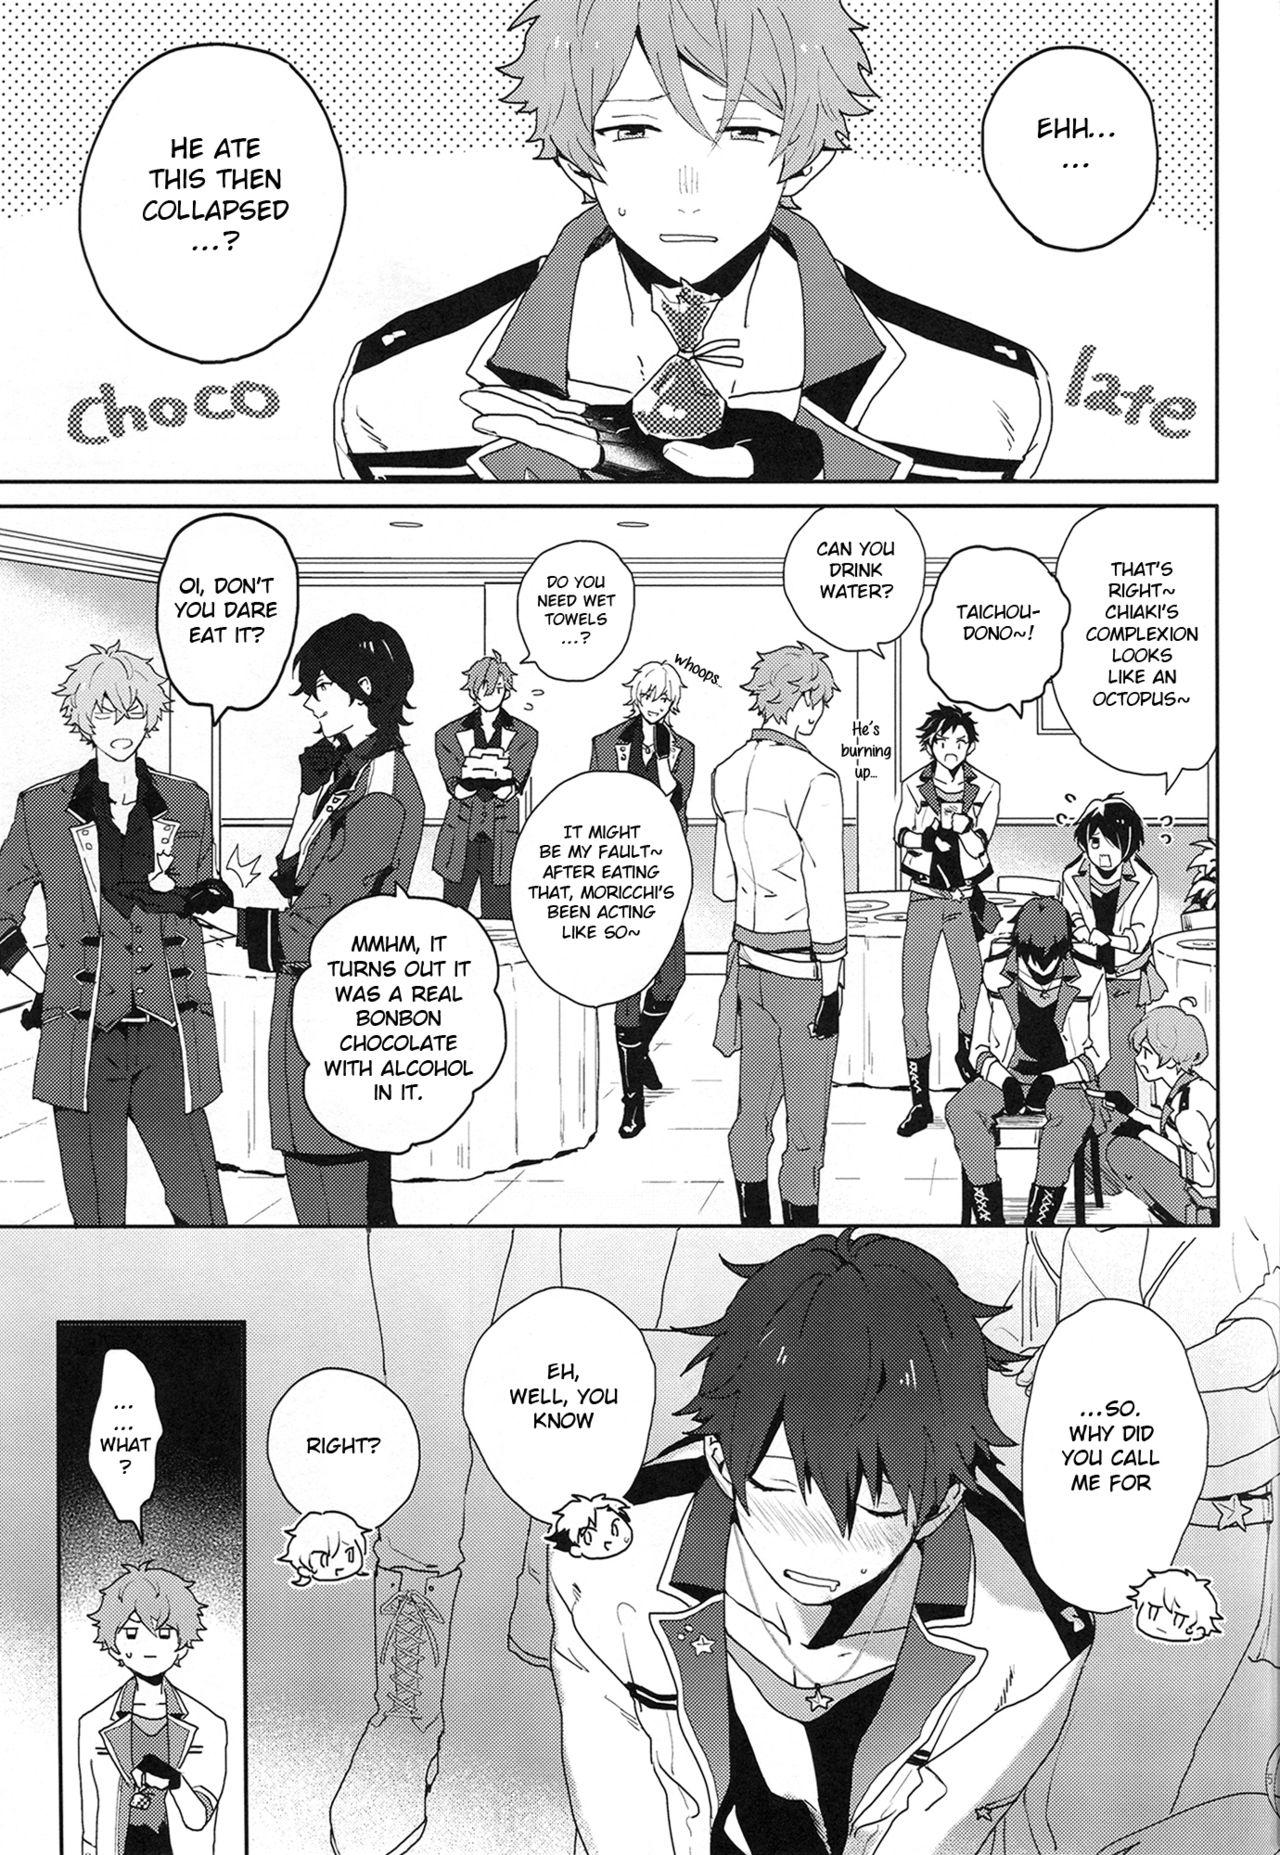 Jerking Off After the Holiday Party! - Ensemble stars Naturaltits - Page 5